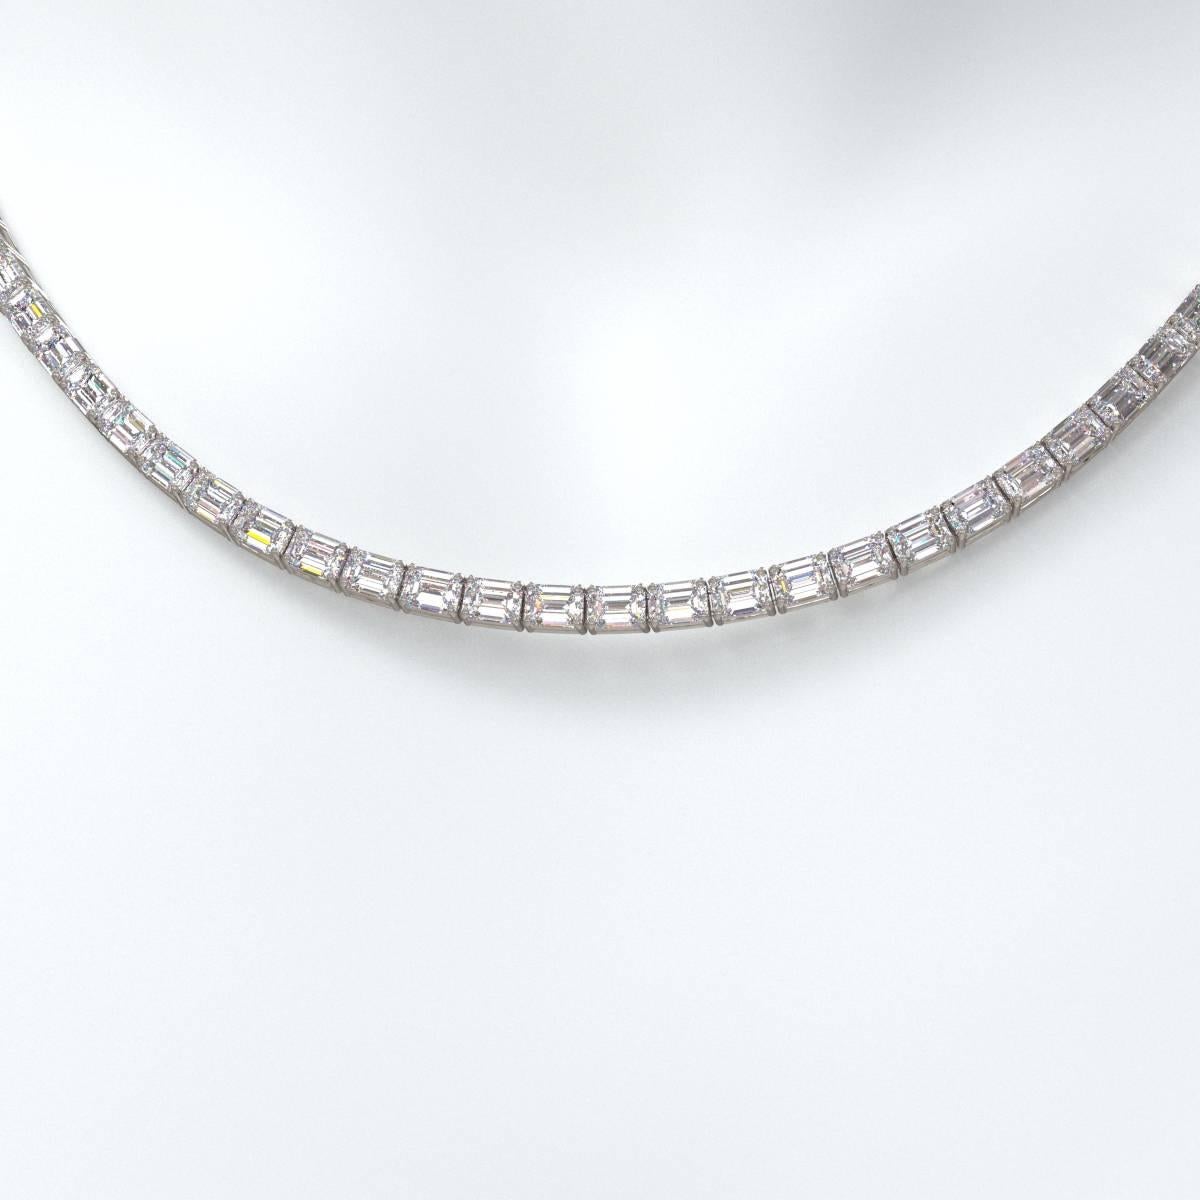 The approximate measurements of each diamond link would be 4.30mm long. This necklace is set in 18k white gold and can be ordered in Platinum for an additional cost. Hand made in the Emilio Jewelry Atelier, we produce this necklace with larger